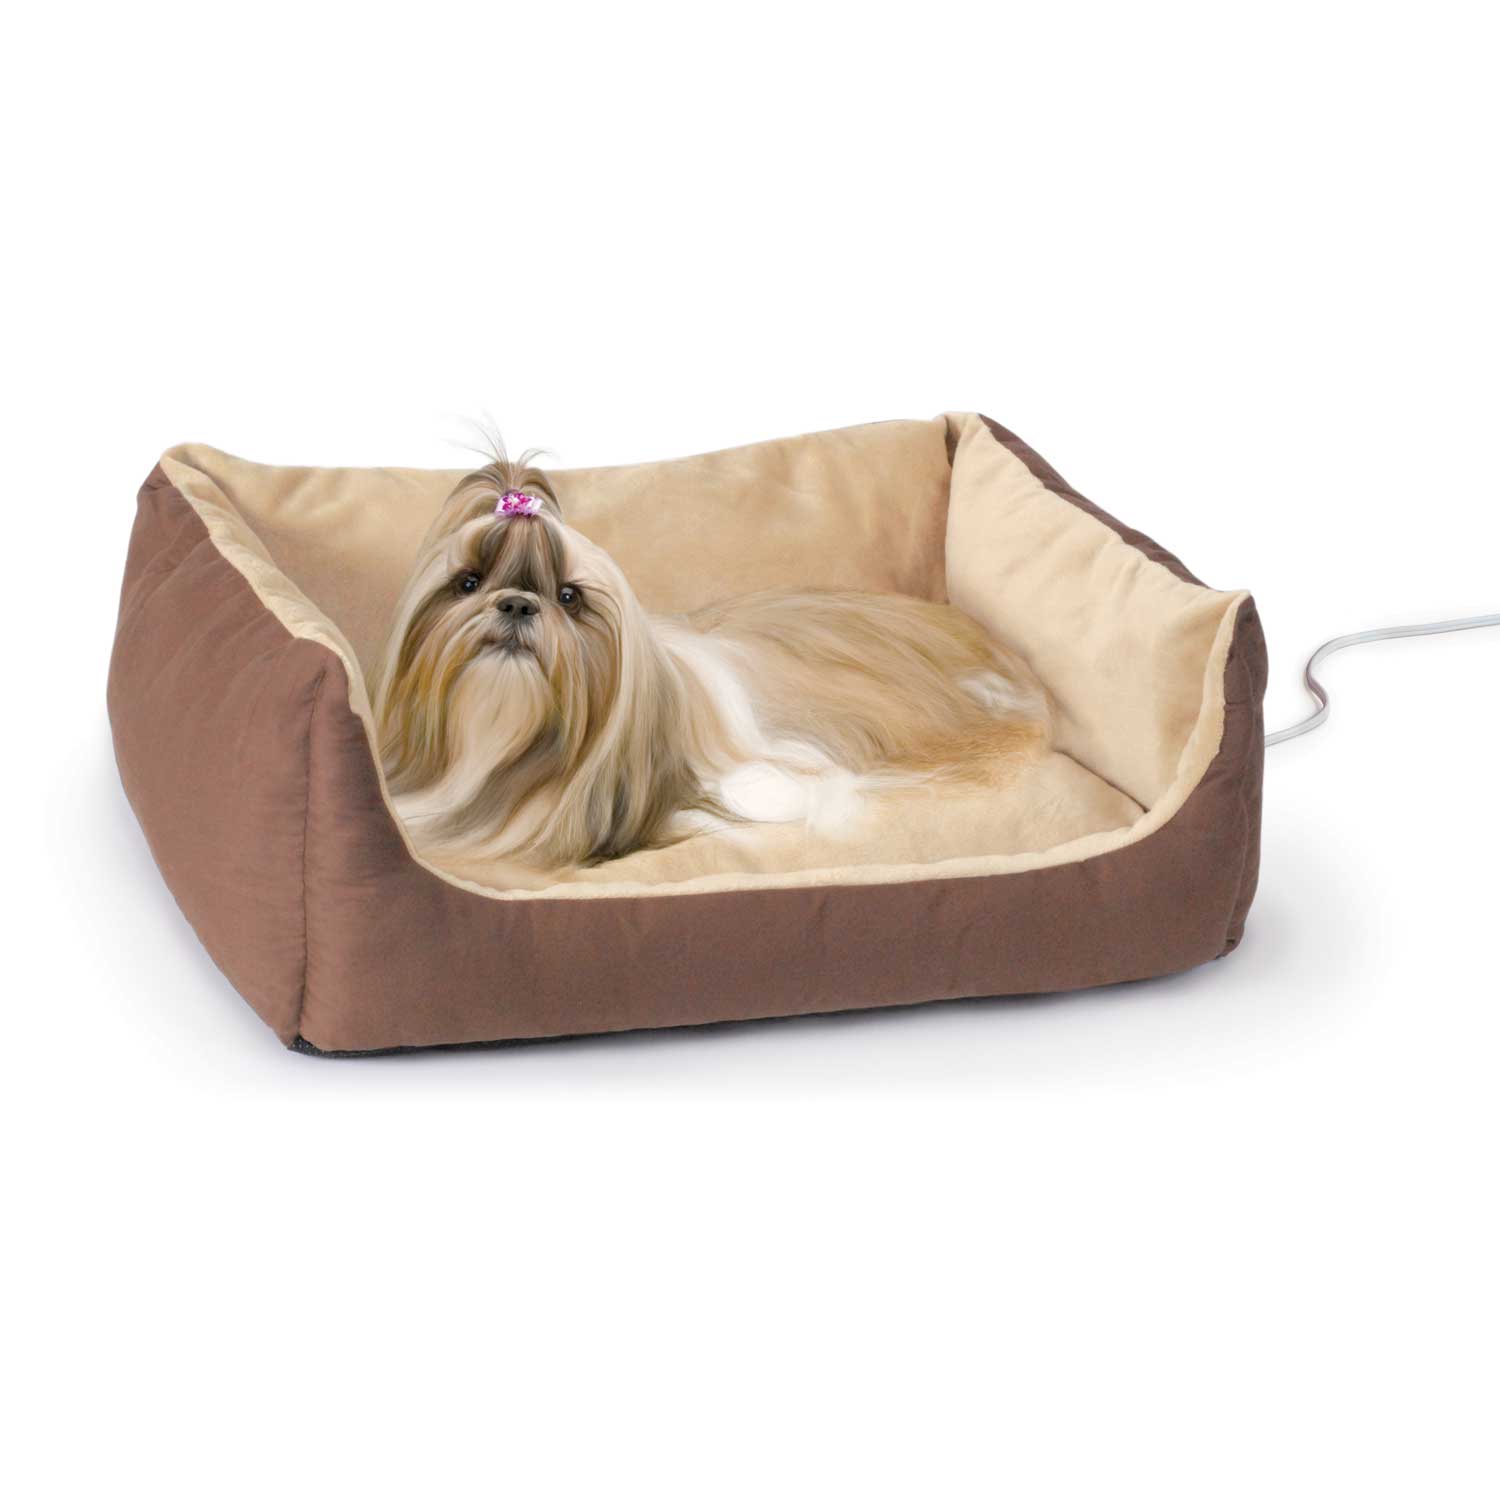 Photos - Bed & Furniture K&H Thermo-Pet Cuddle Cushion Heated Dog Bed in Mocha, 14" L x 23" W, 